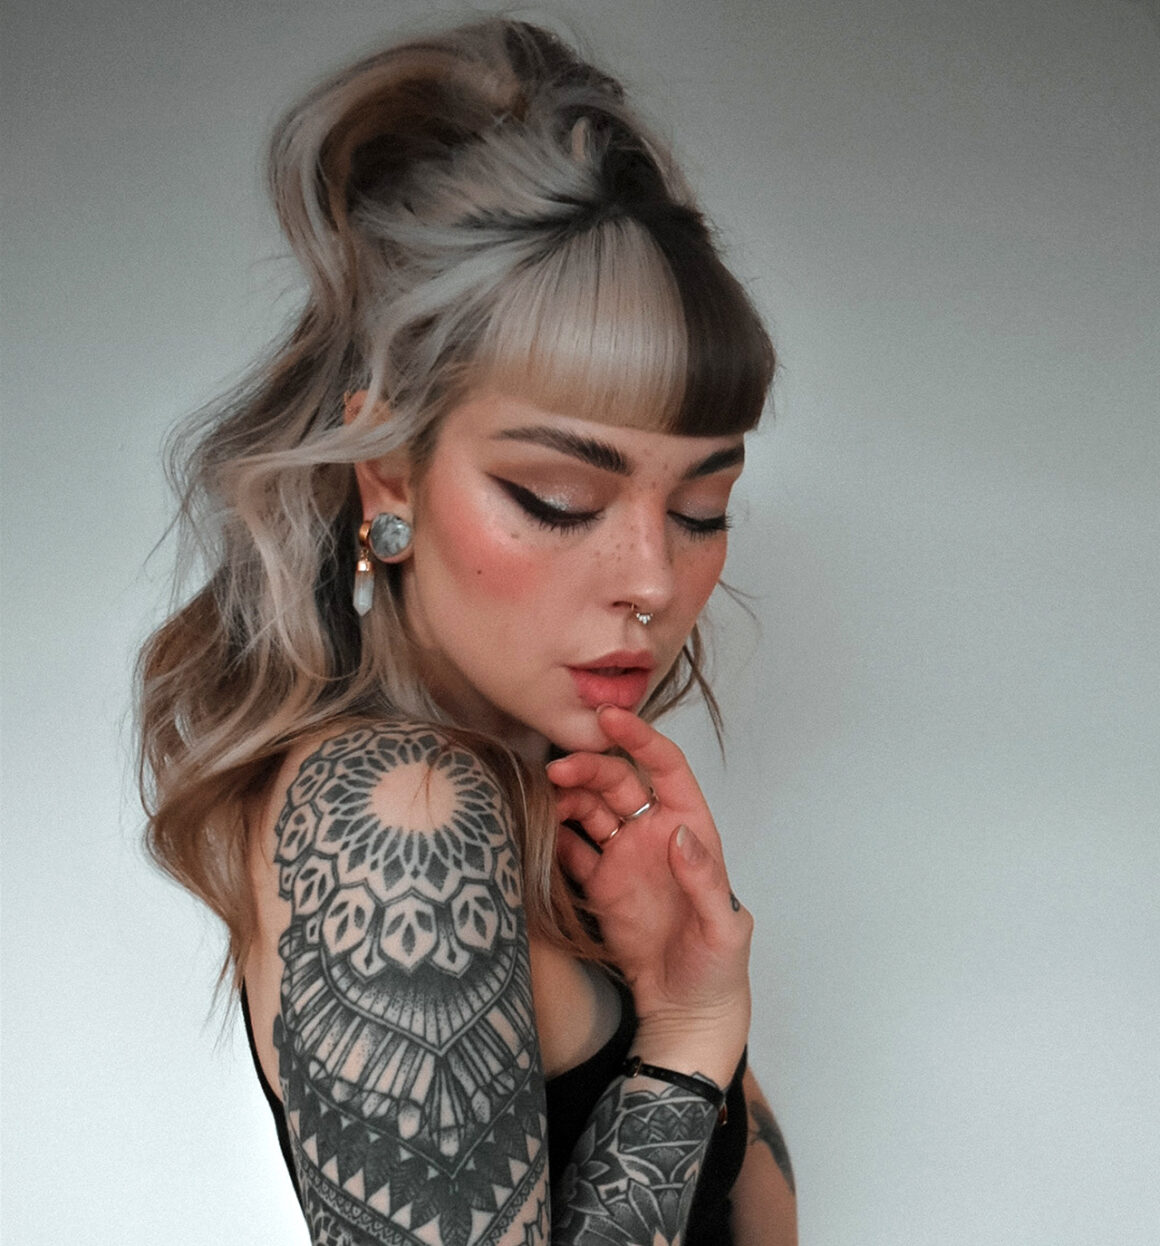 Will a Tattoo Affect Your Model Career? - UK Models-cheohanoi.vn